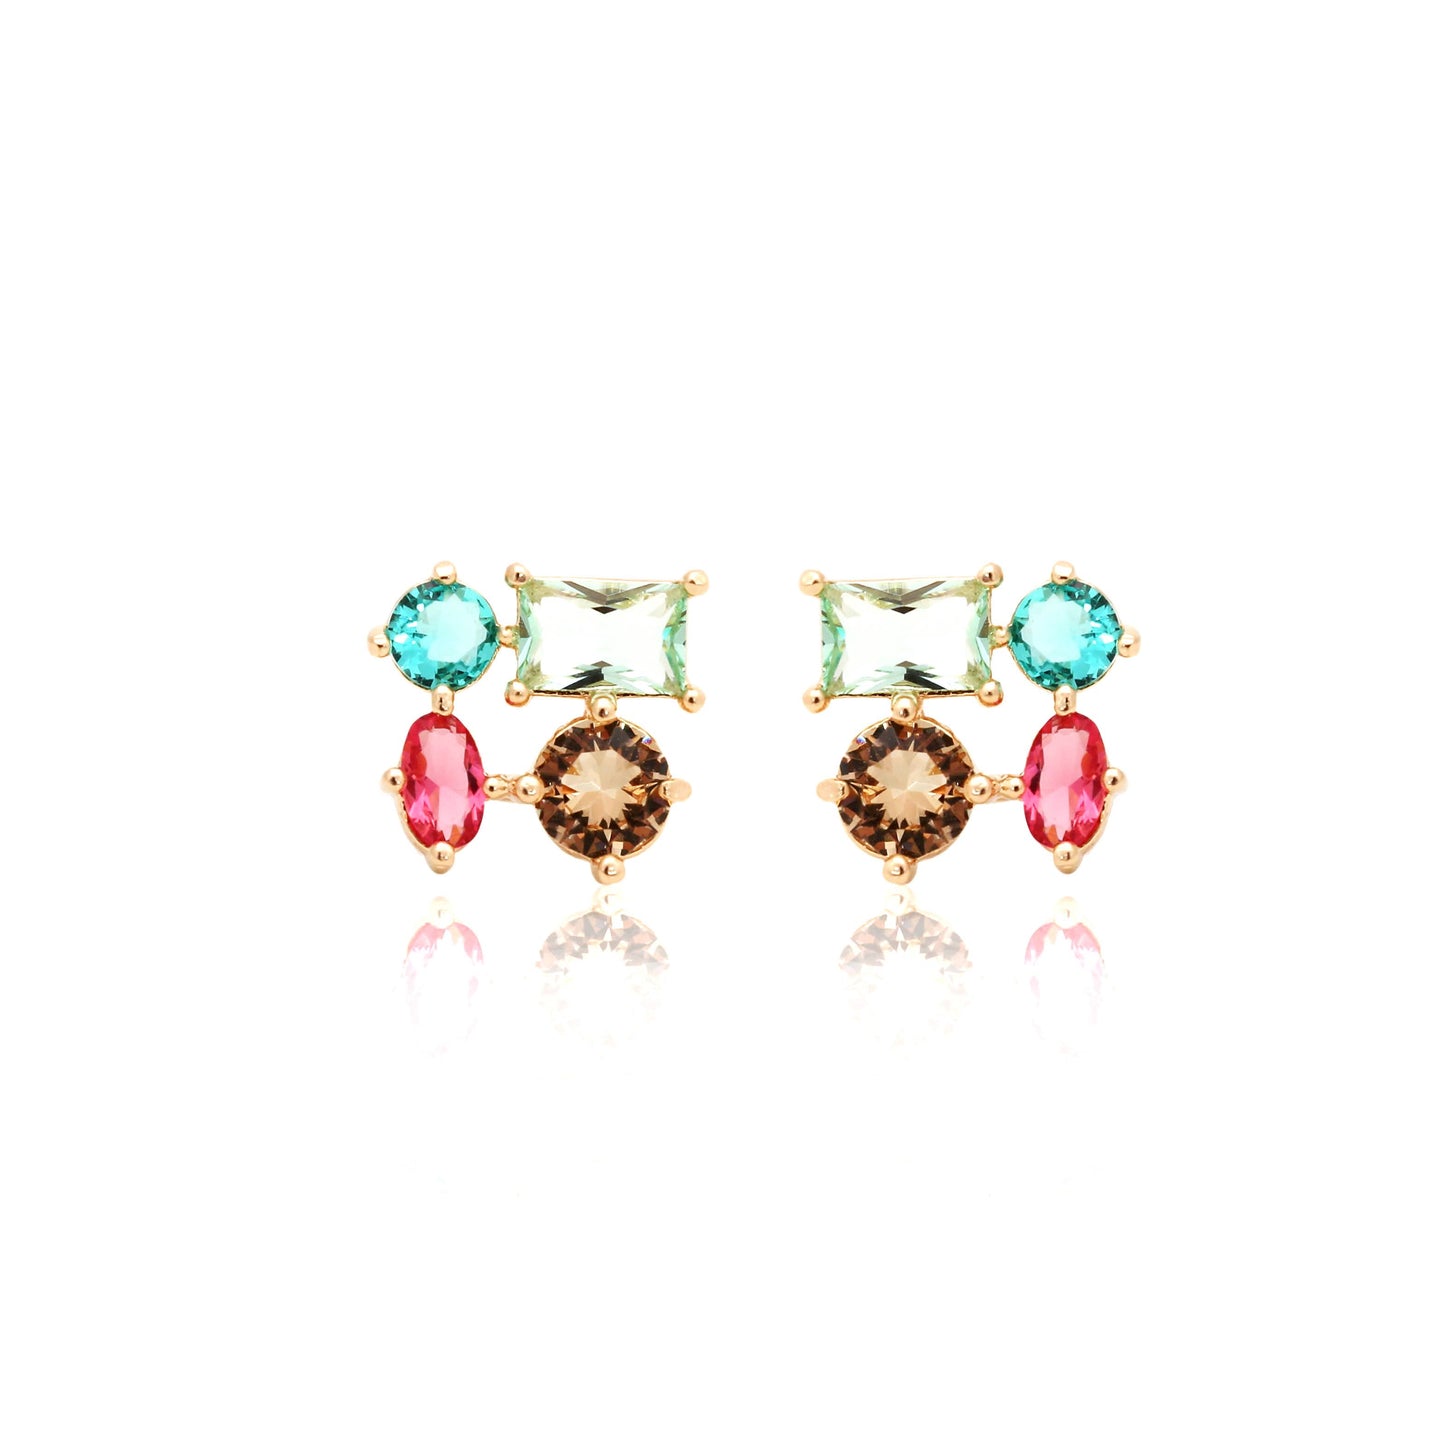 Earring with different shapes of colorful crystals (Pink tourmaline)